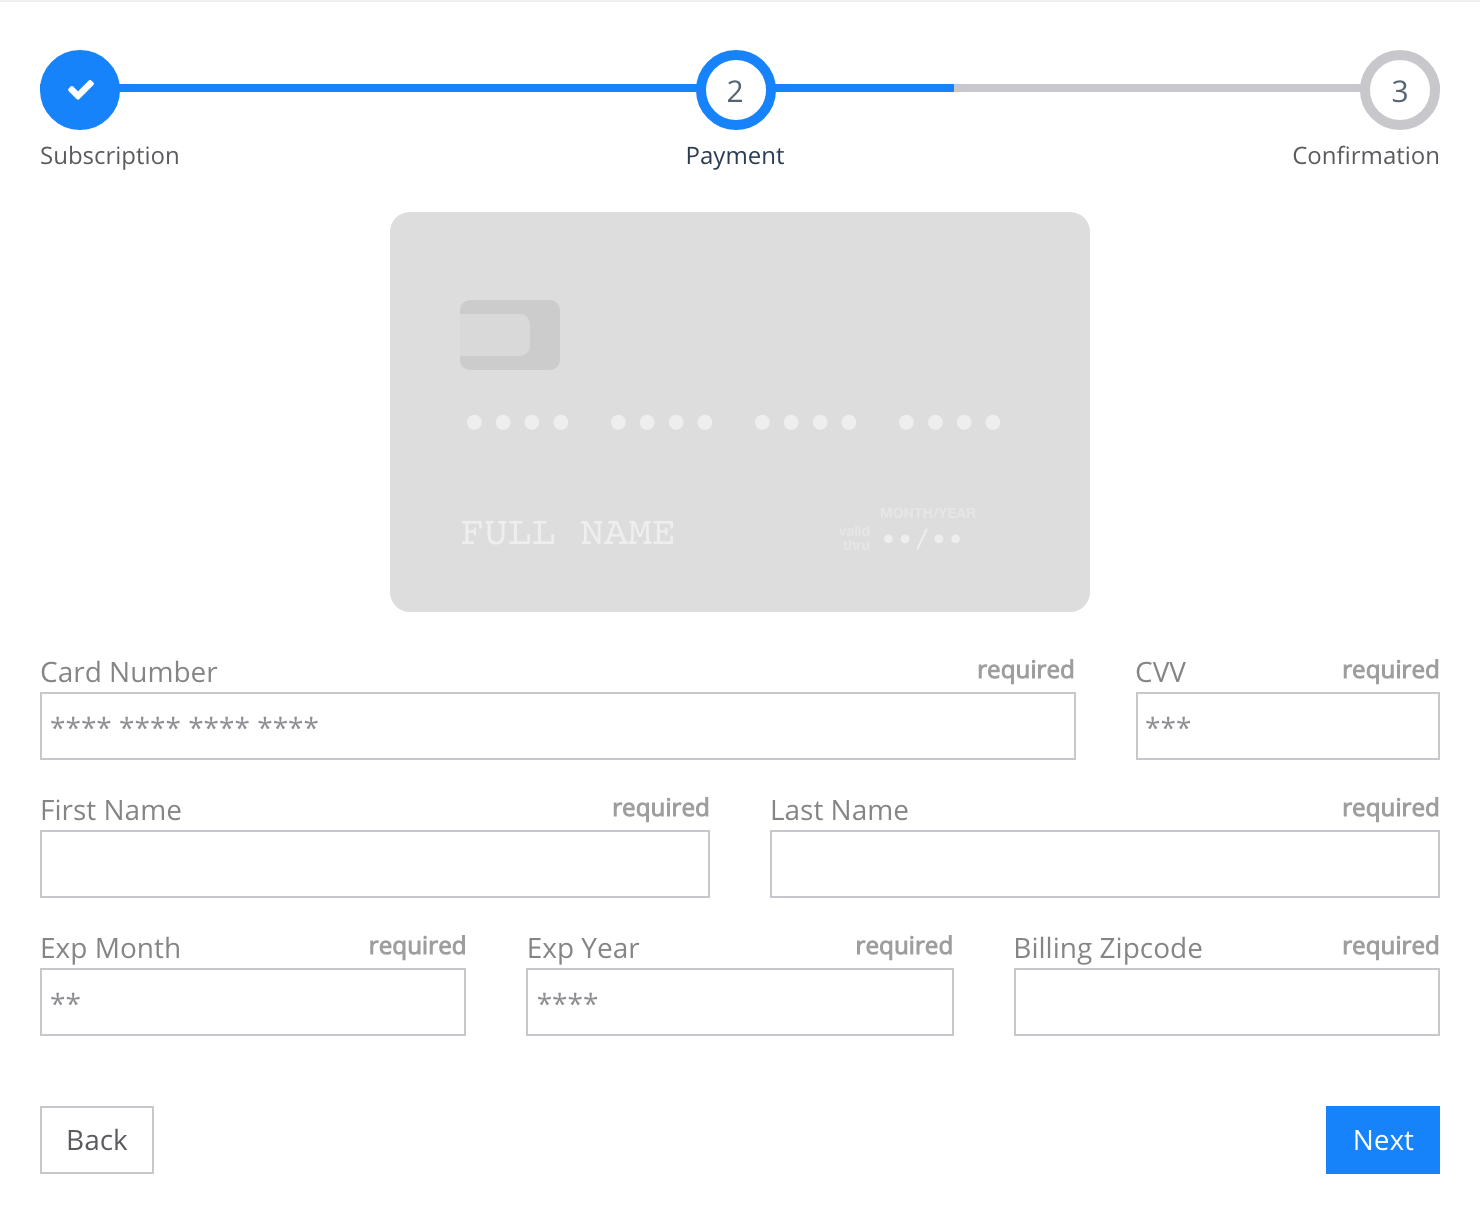 The Payment screen